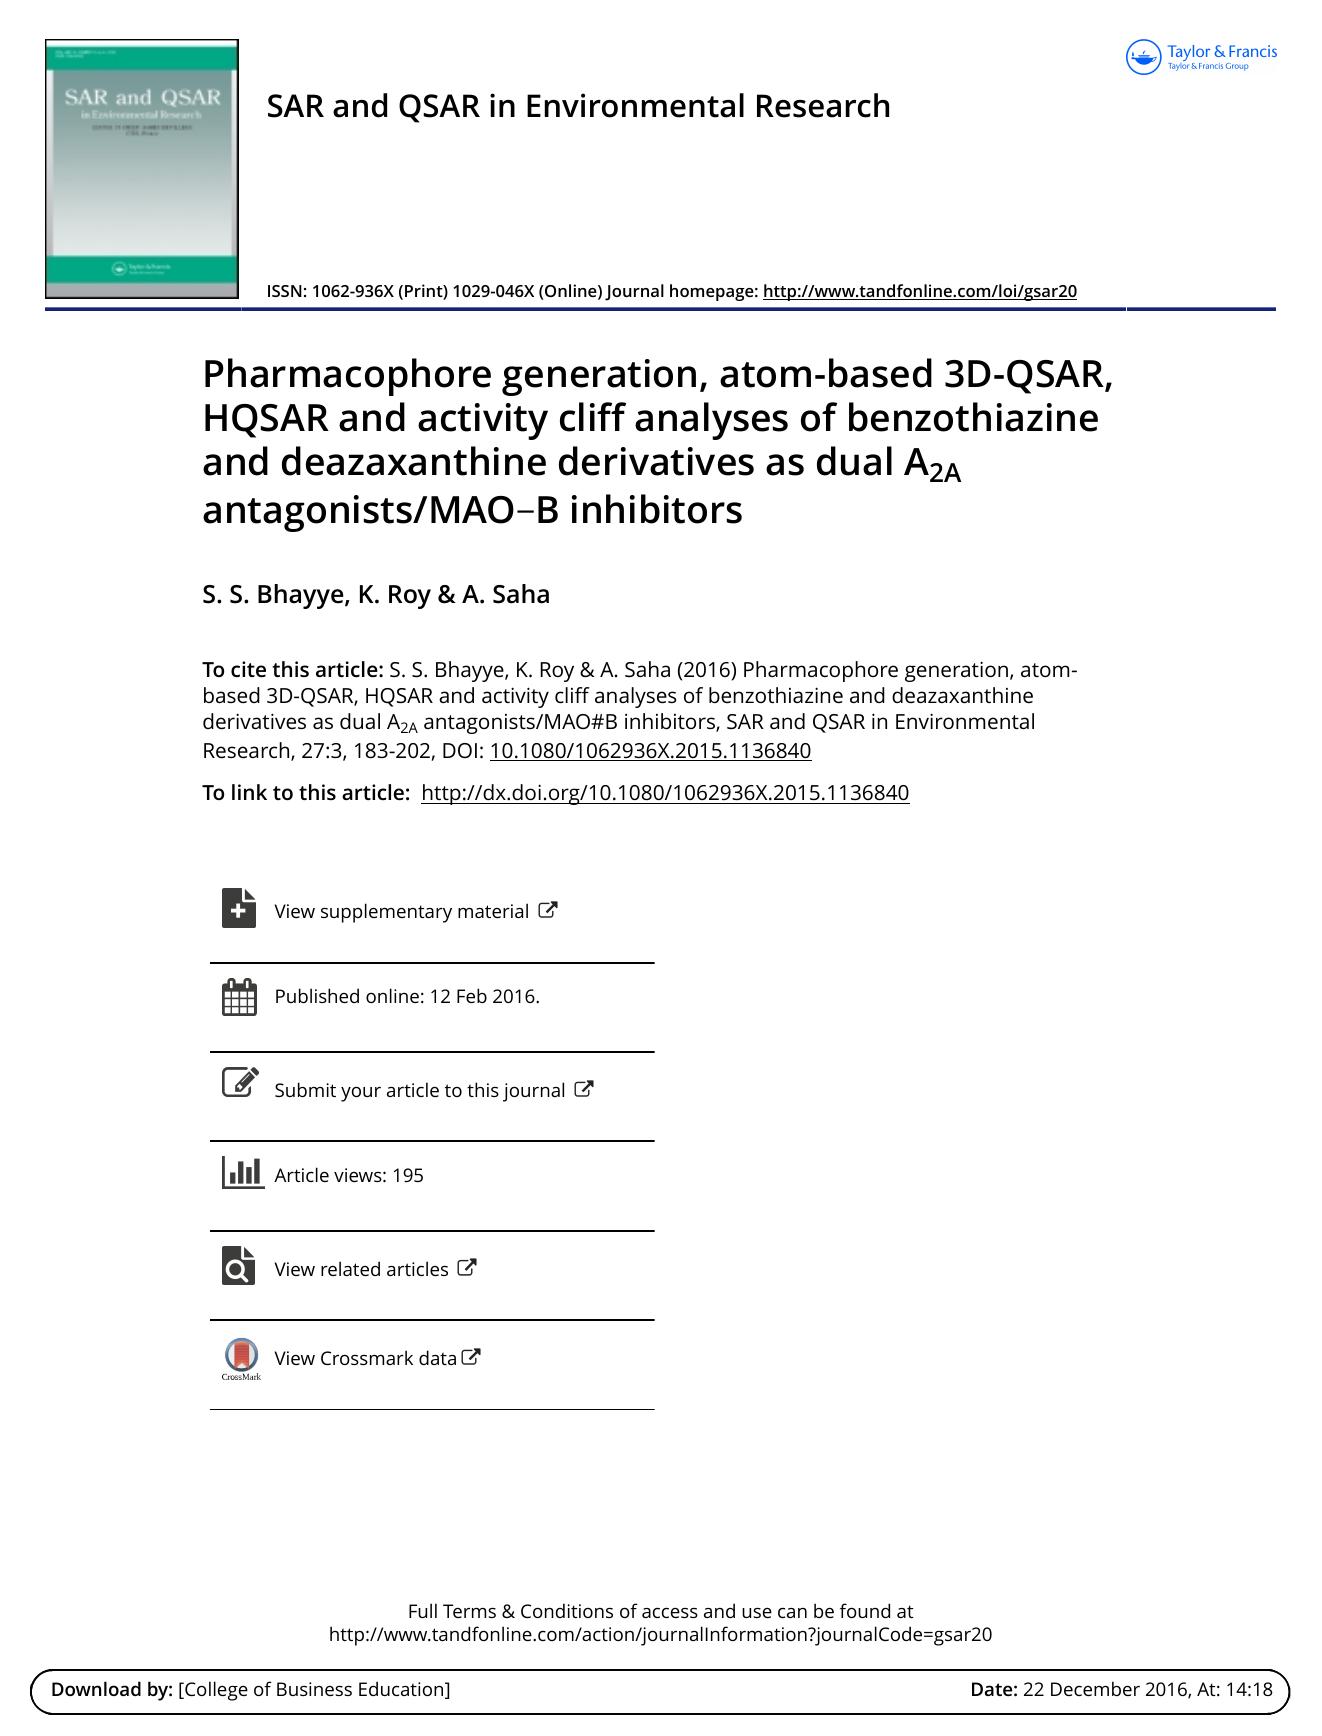 Pharmacophore generation, atom-based 3D-QSAR, HQSAR and activity cliff analyses of benzothiazine and deazaxanthine derivatives as dual A2A antagonistsMAOâB inhibitors by S. S. Bhayye & K. Roy & A. Saha